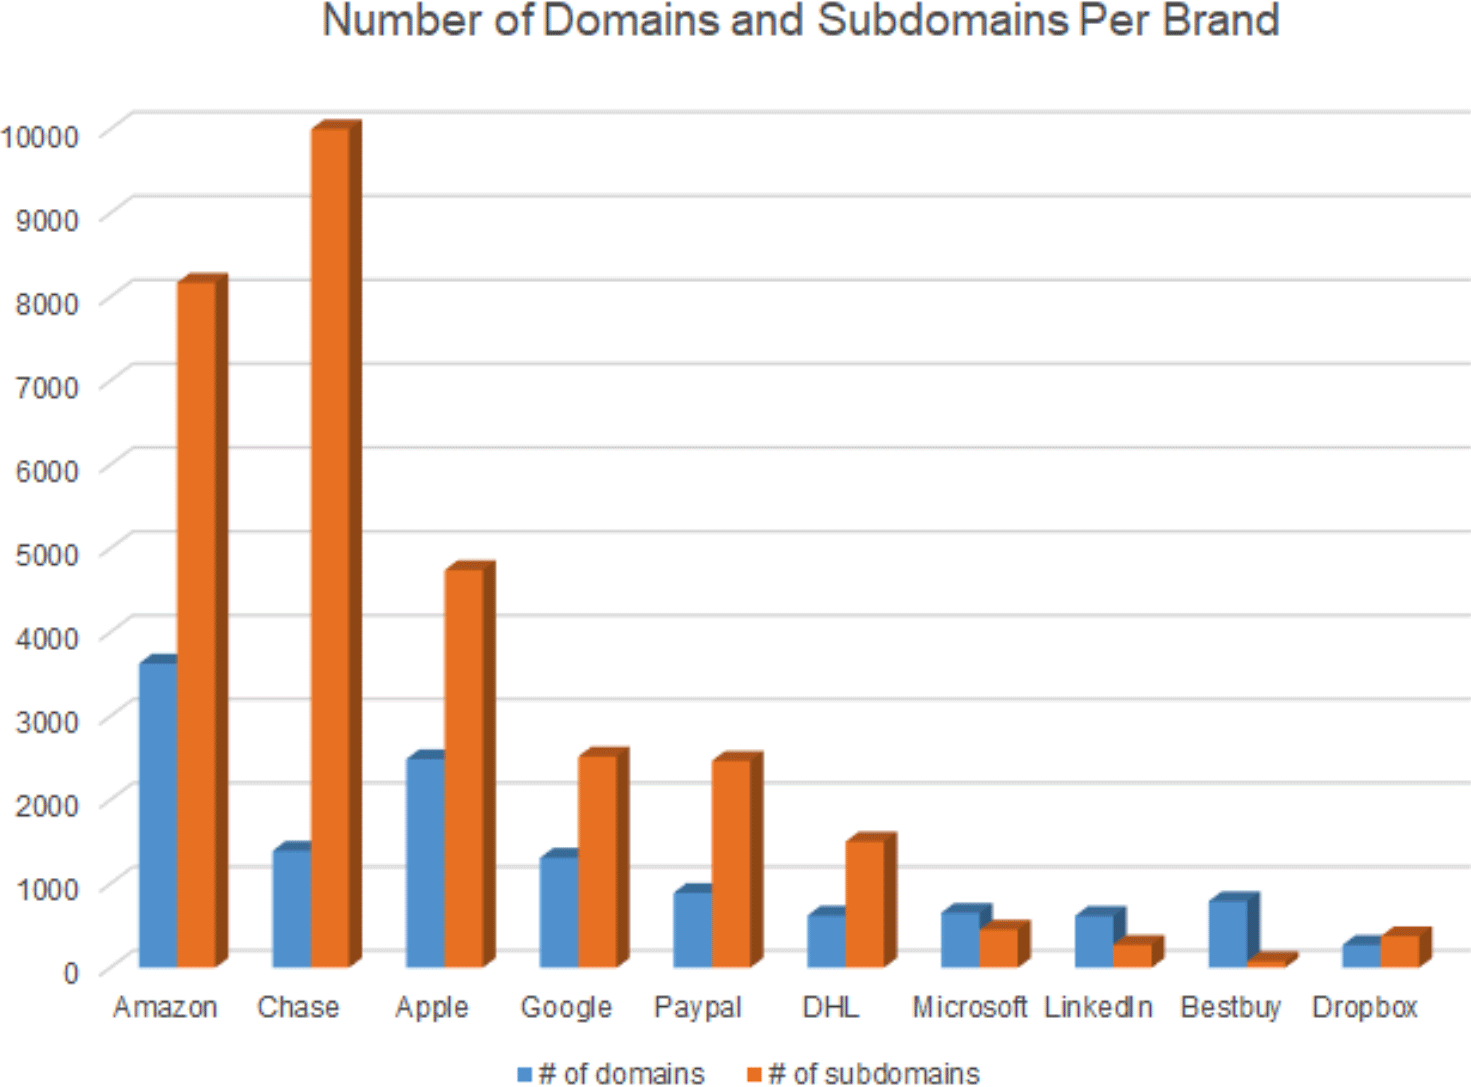 Q2 2021 Top 10 Most Impersonated Brands in Domains 14